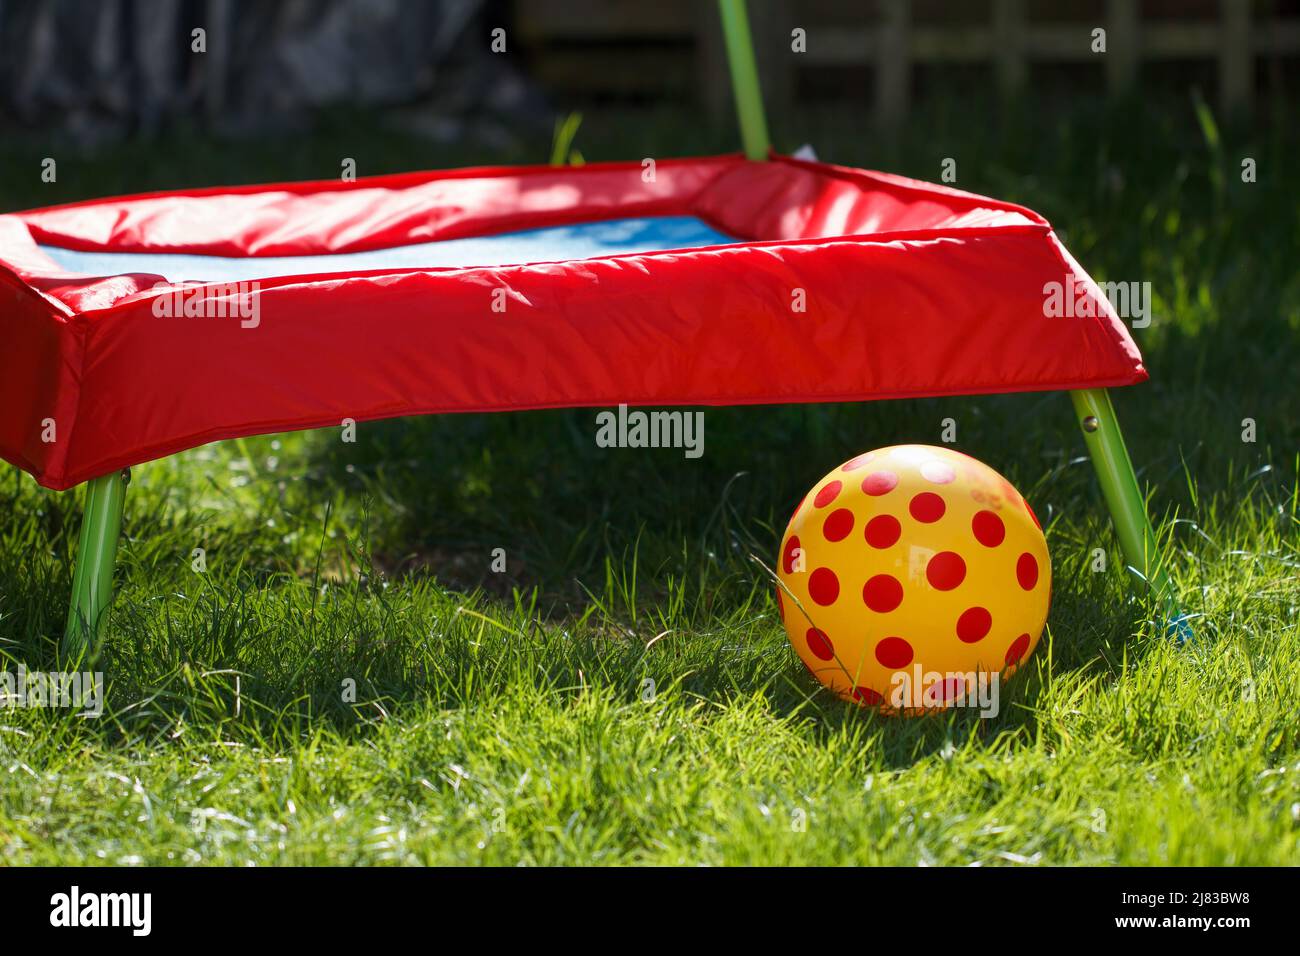 Child's trampoline and ball in a home garden setting Stock Photo